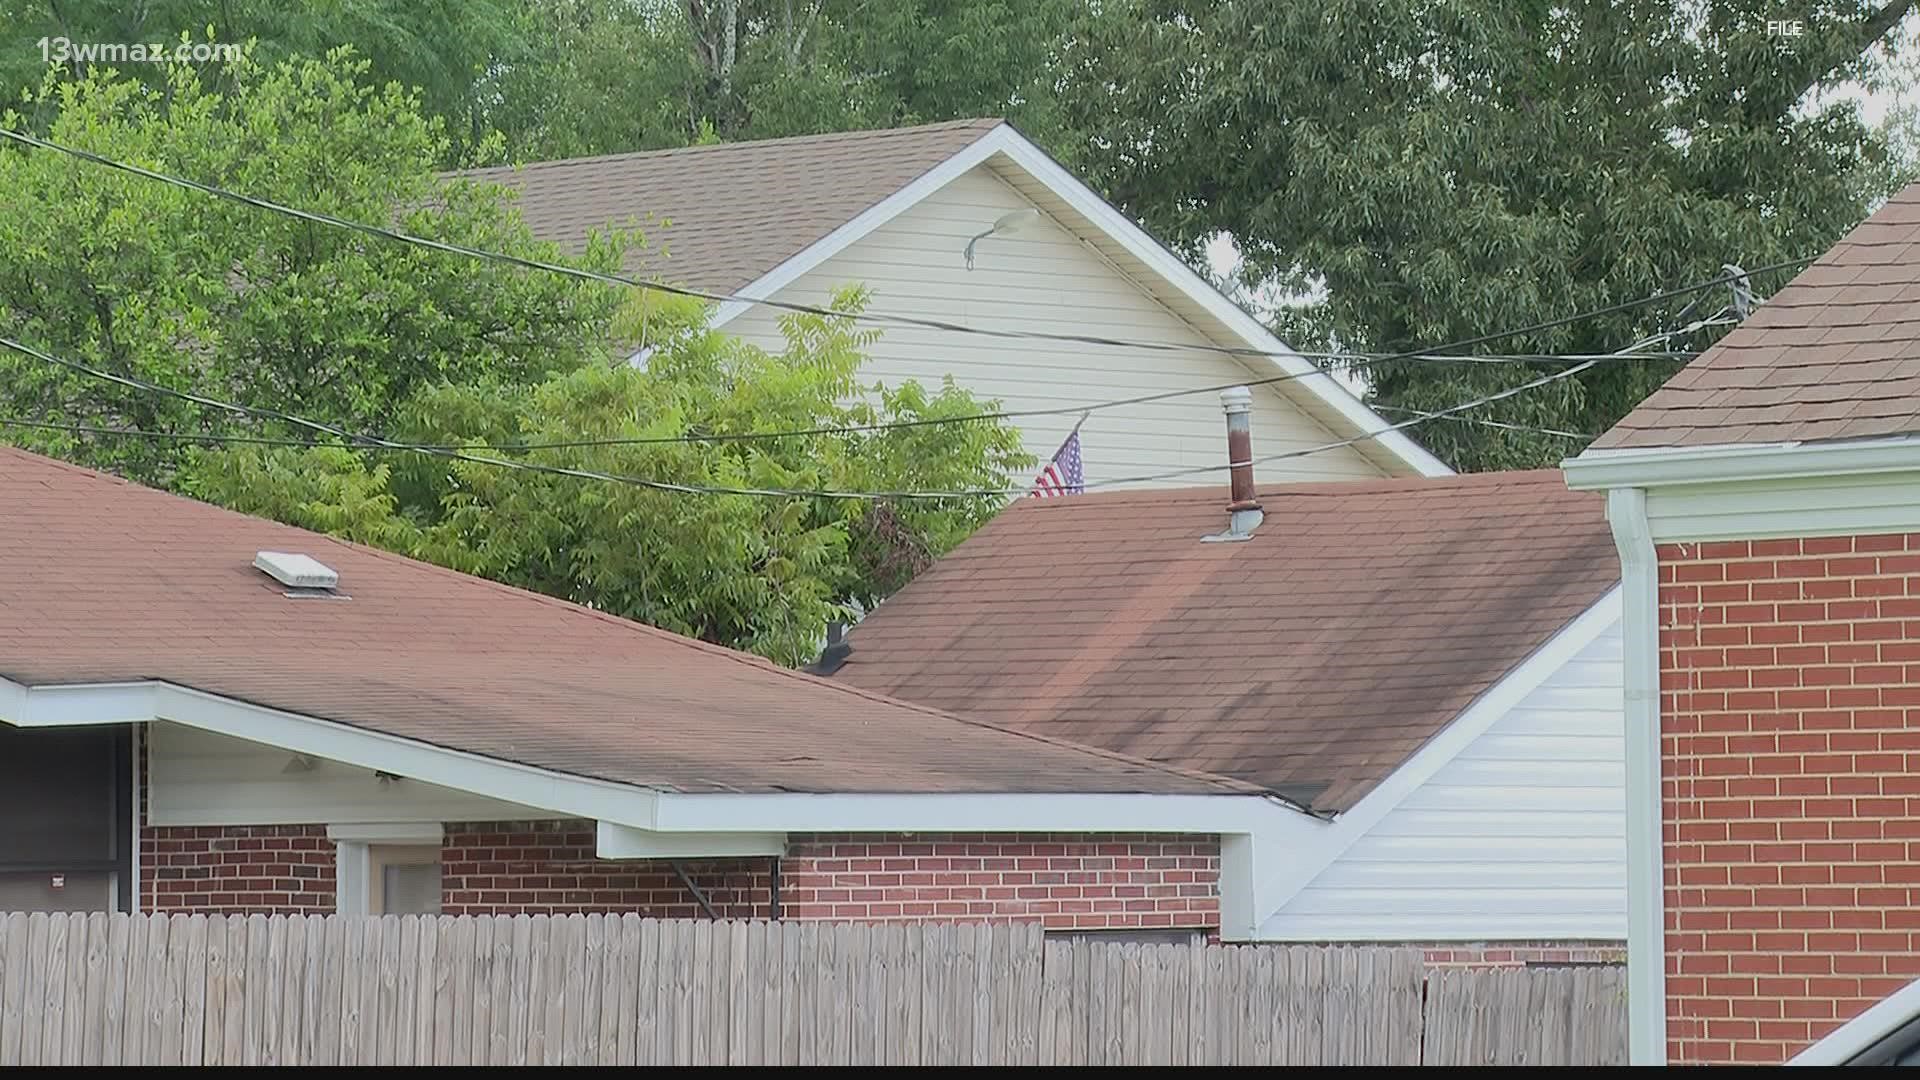 Most Warner Robins property owners could see higher tax bills, because property assessments went up and the city has not adopted the rollback rate.